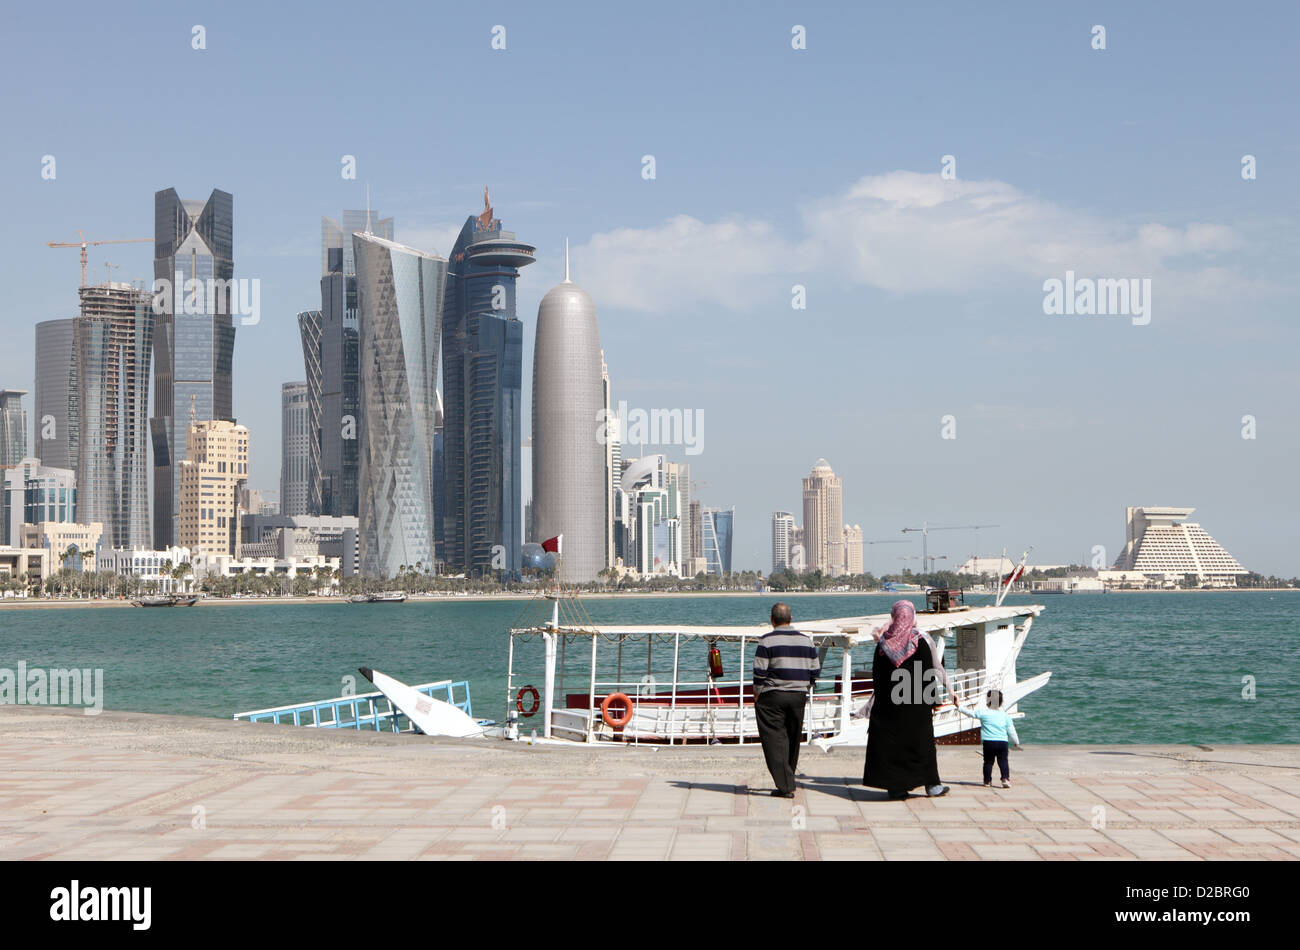 A Muslim family, three people, enjoy an outing on the Corniche, in Doha, Qatar, in the shadow of the  high-rise development Stock Photo